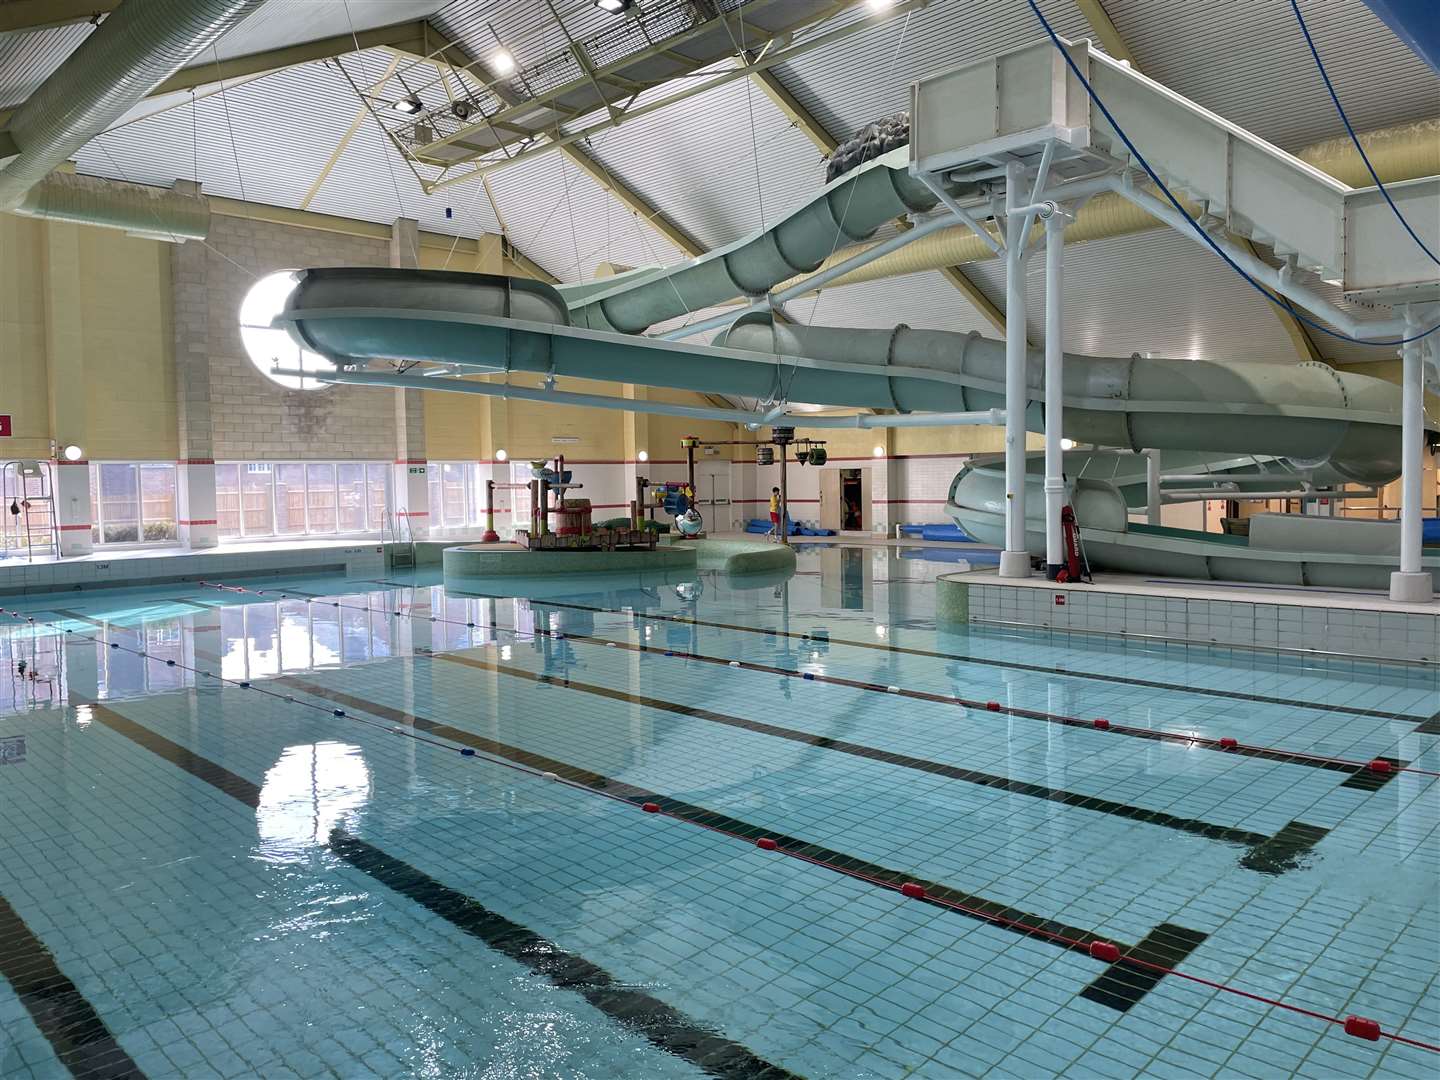 The swimming pool has been closed since the beginning of December